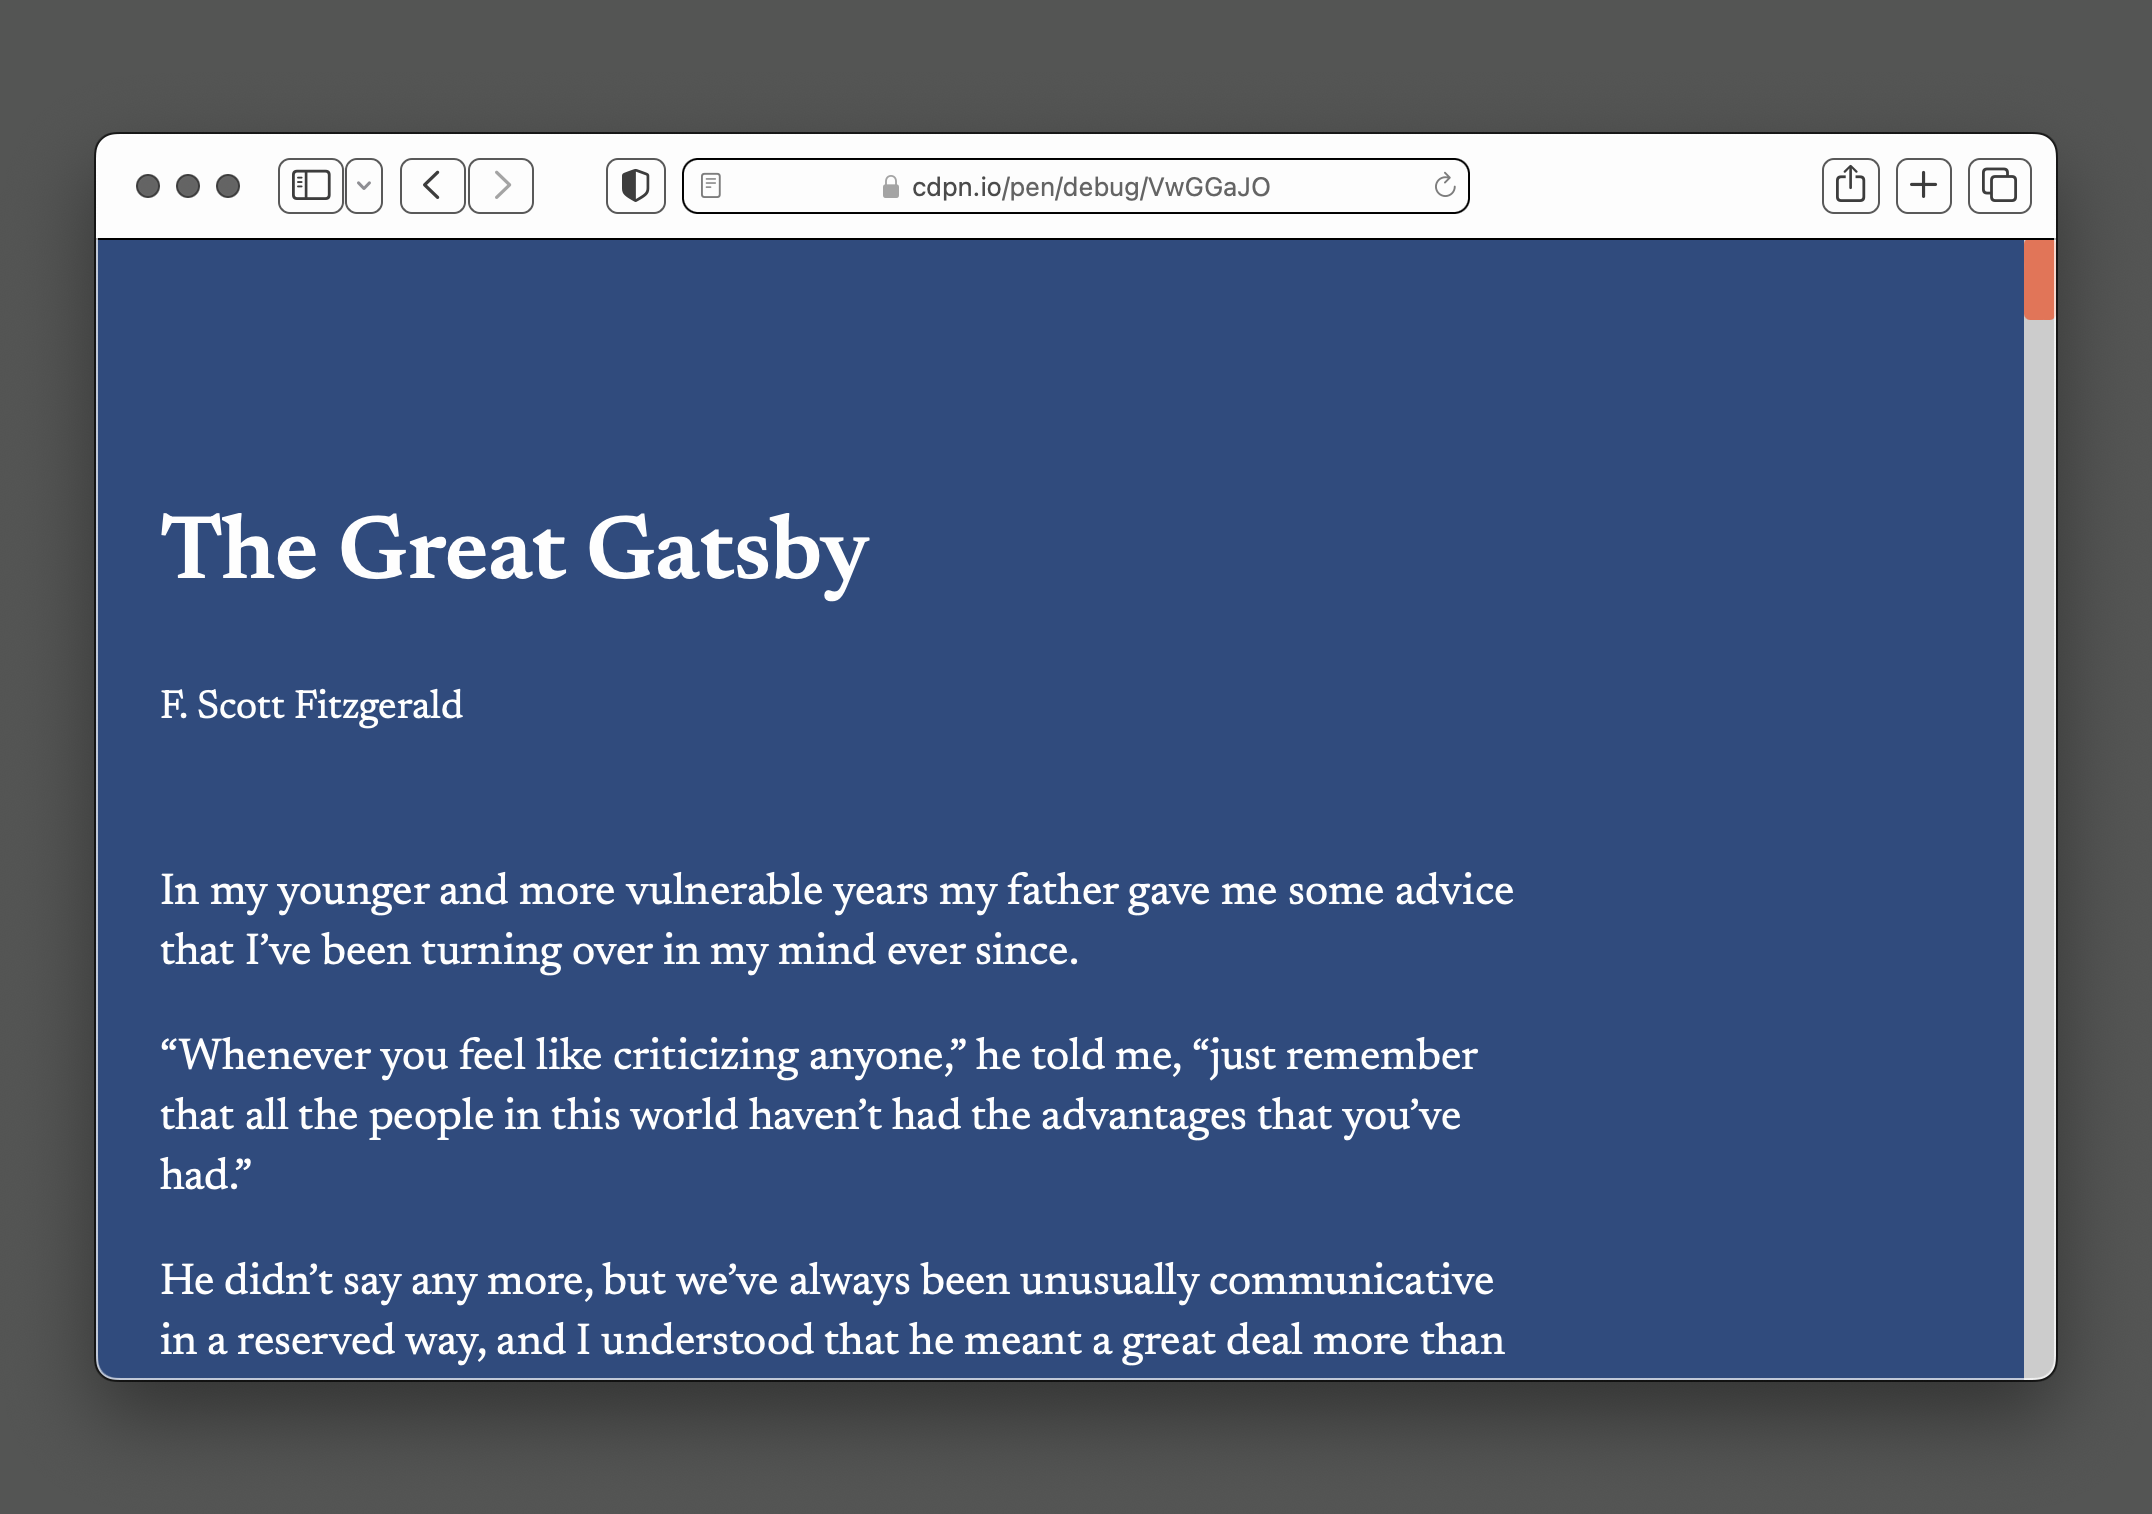 Safari with a tab open to a CodePen set the display opening text to The Great Gatsby. Safari's browser chrome is outlined to make all its controls more obvious. The styled scrollbar remains unaffected by the application of this display mode. Screenshot.